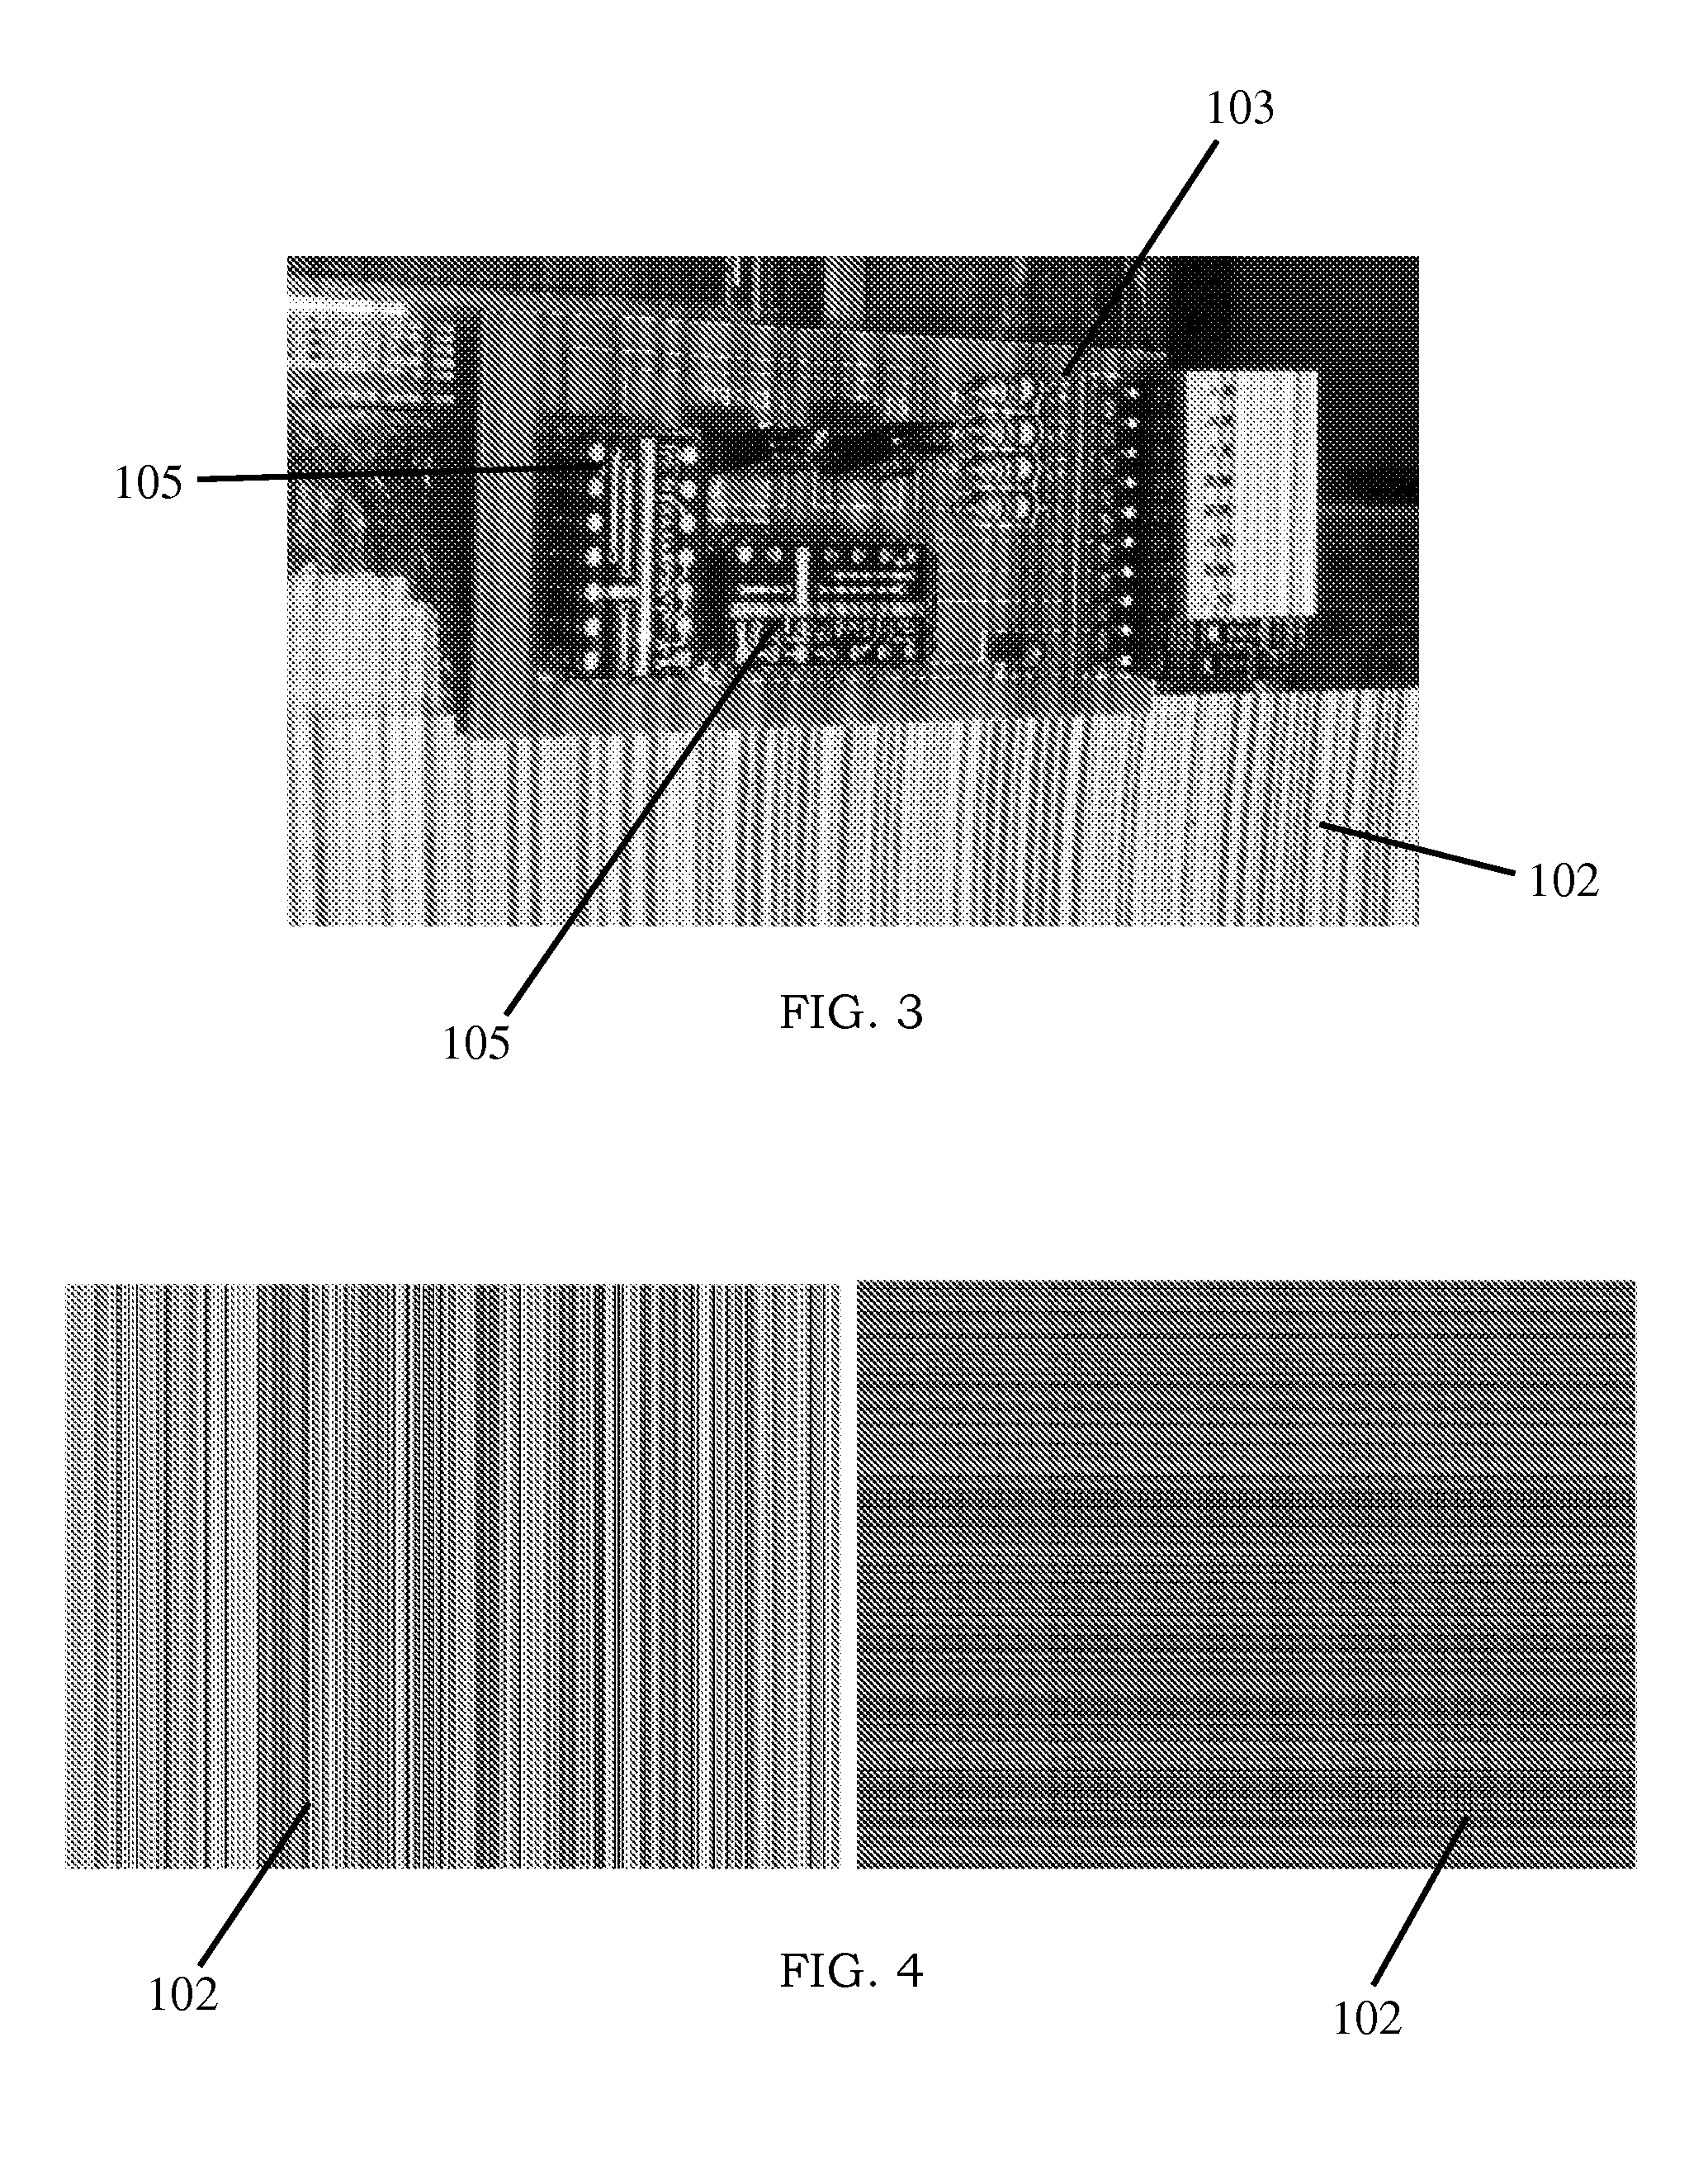 System and Method for Tracking Objects with Projected m-Sequences